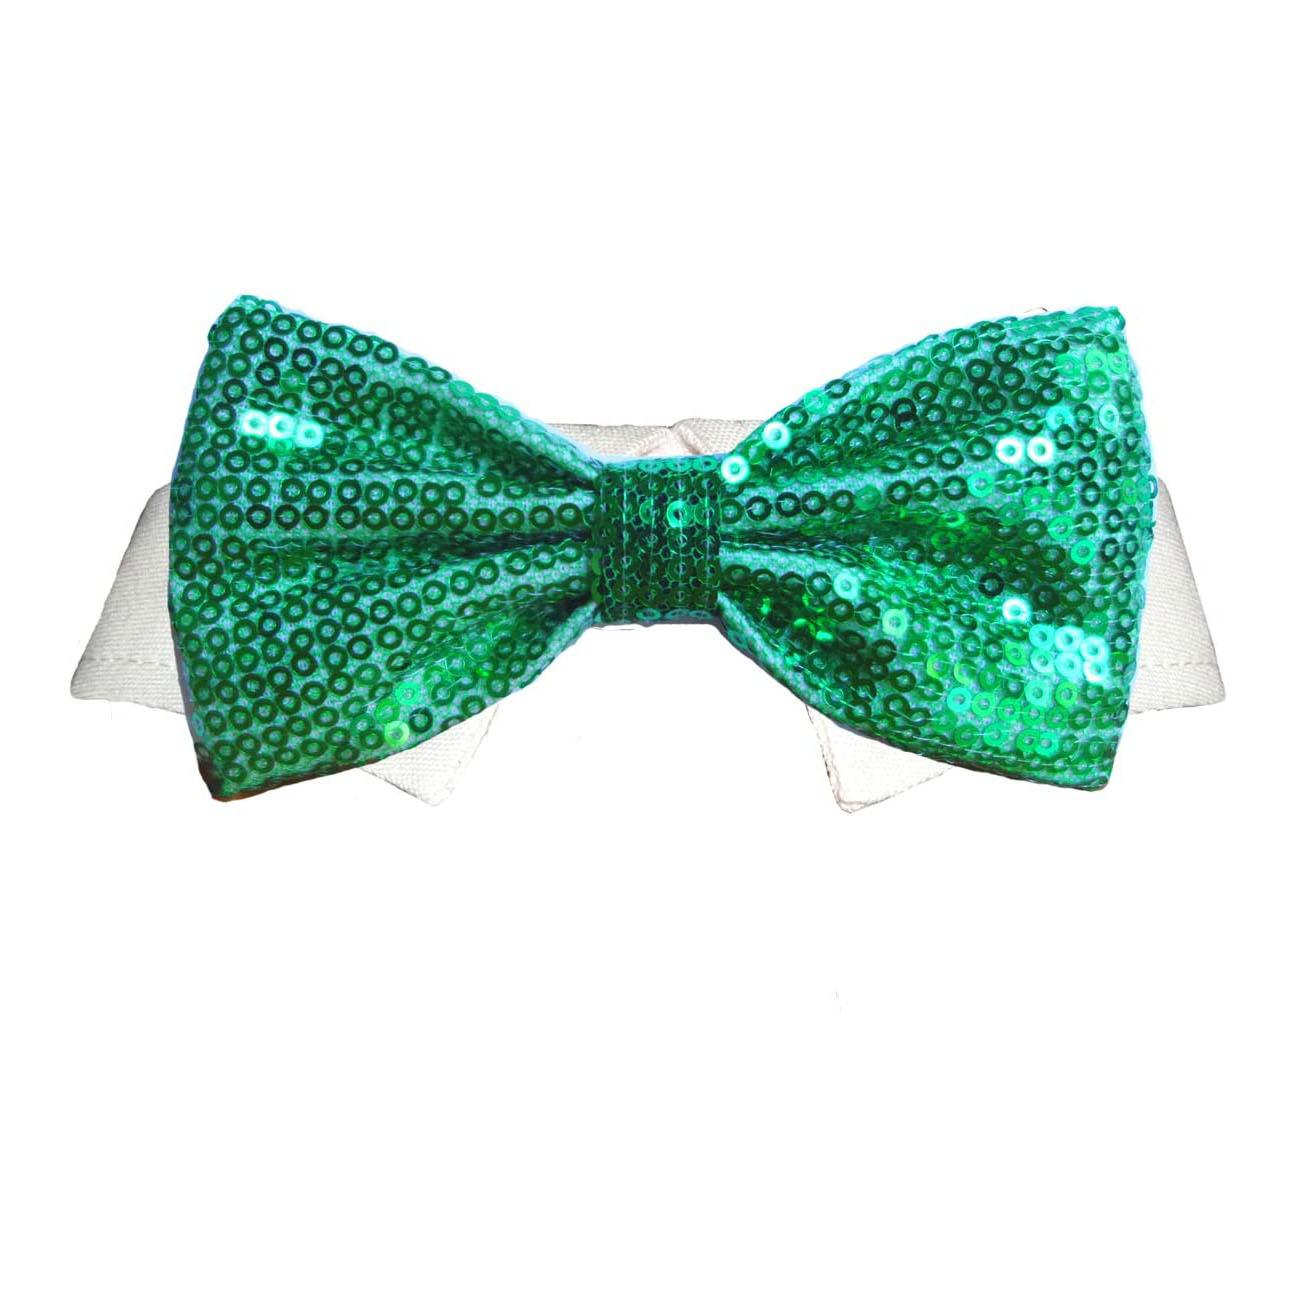 Pooch Outfitters Dublin Dog Shirt Collar and Bow Tie - Green